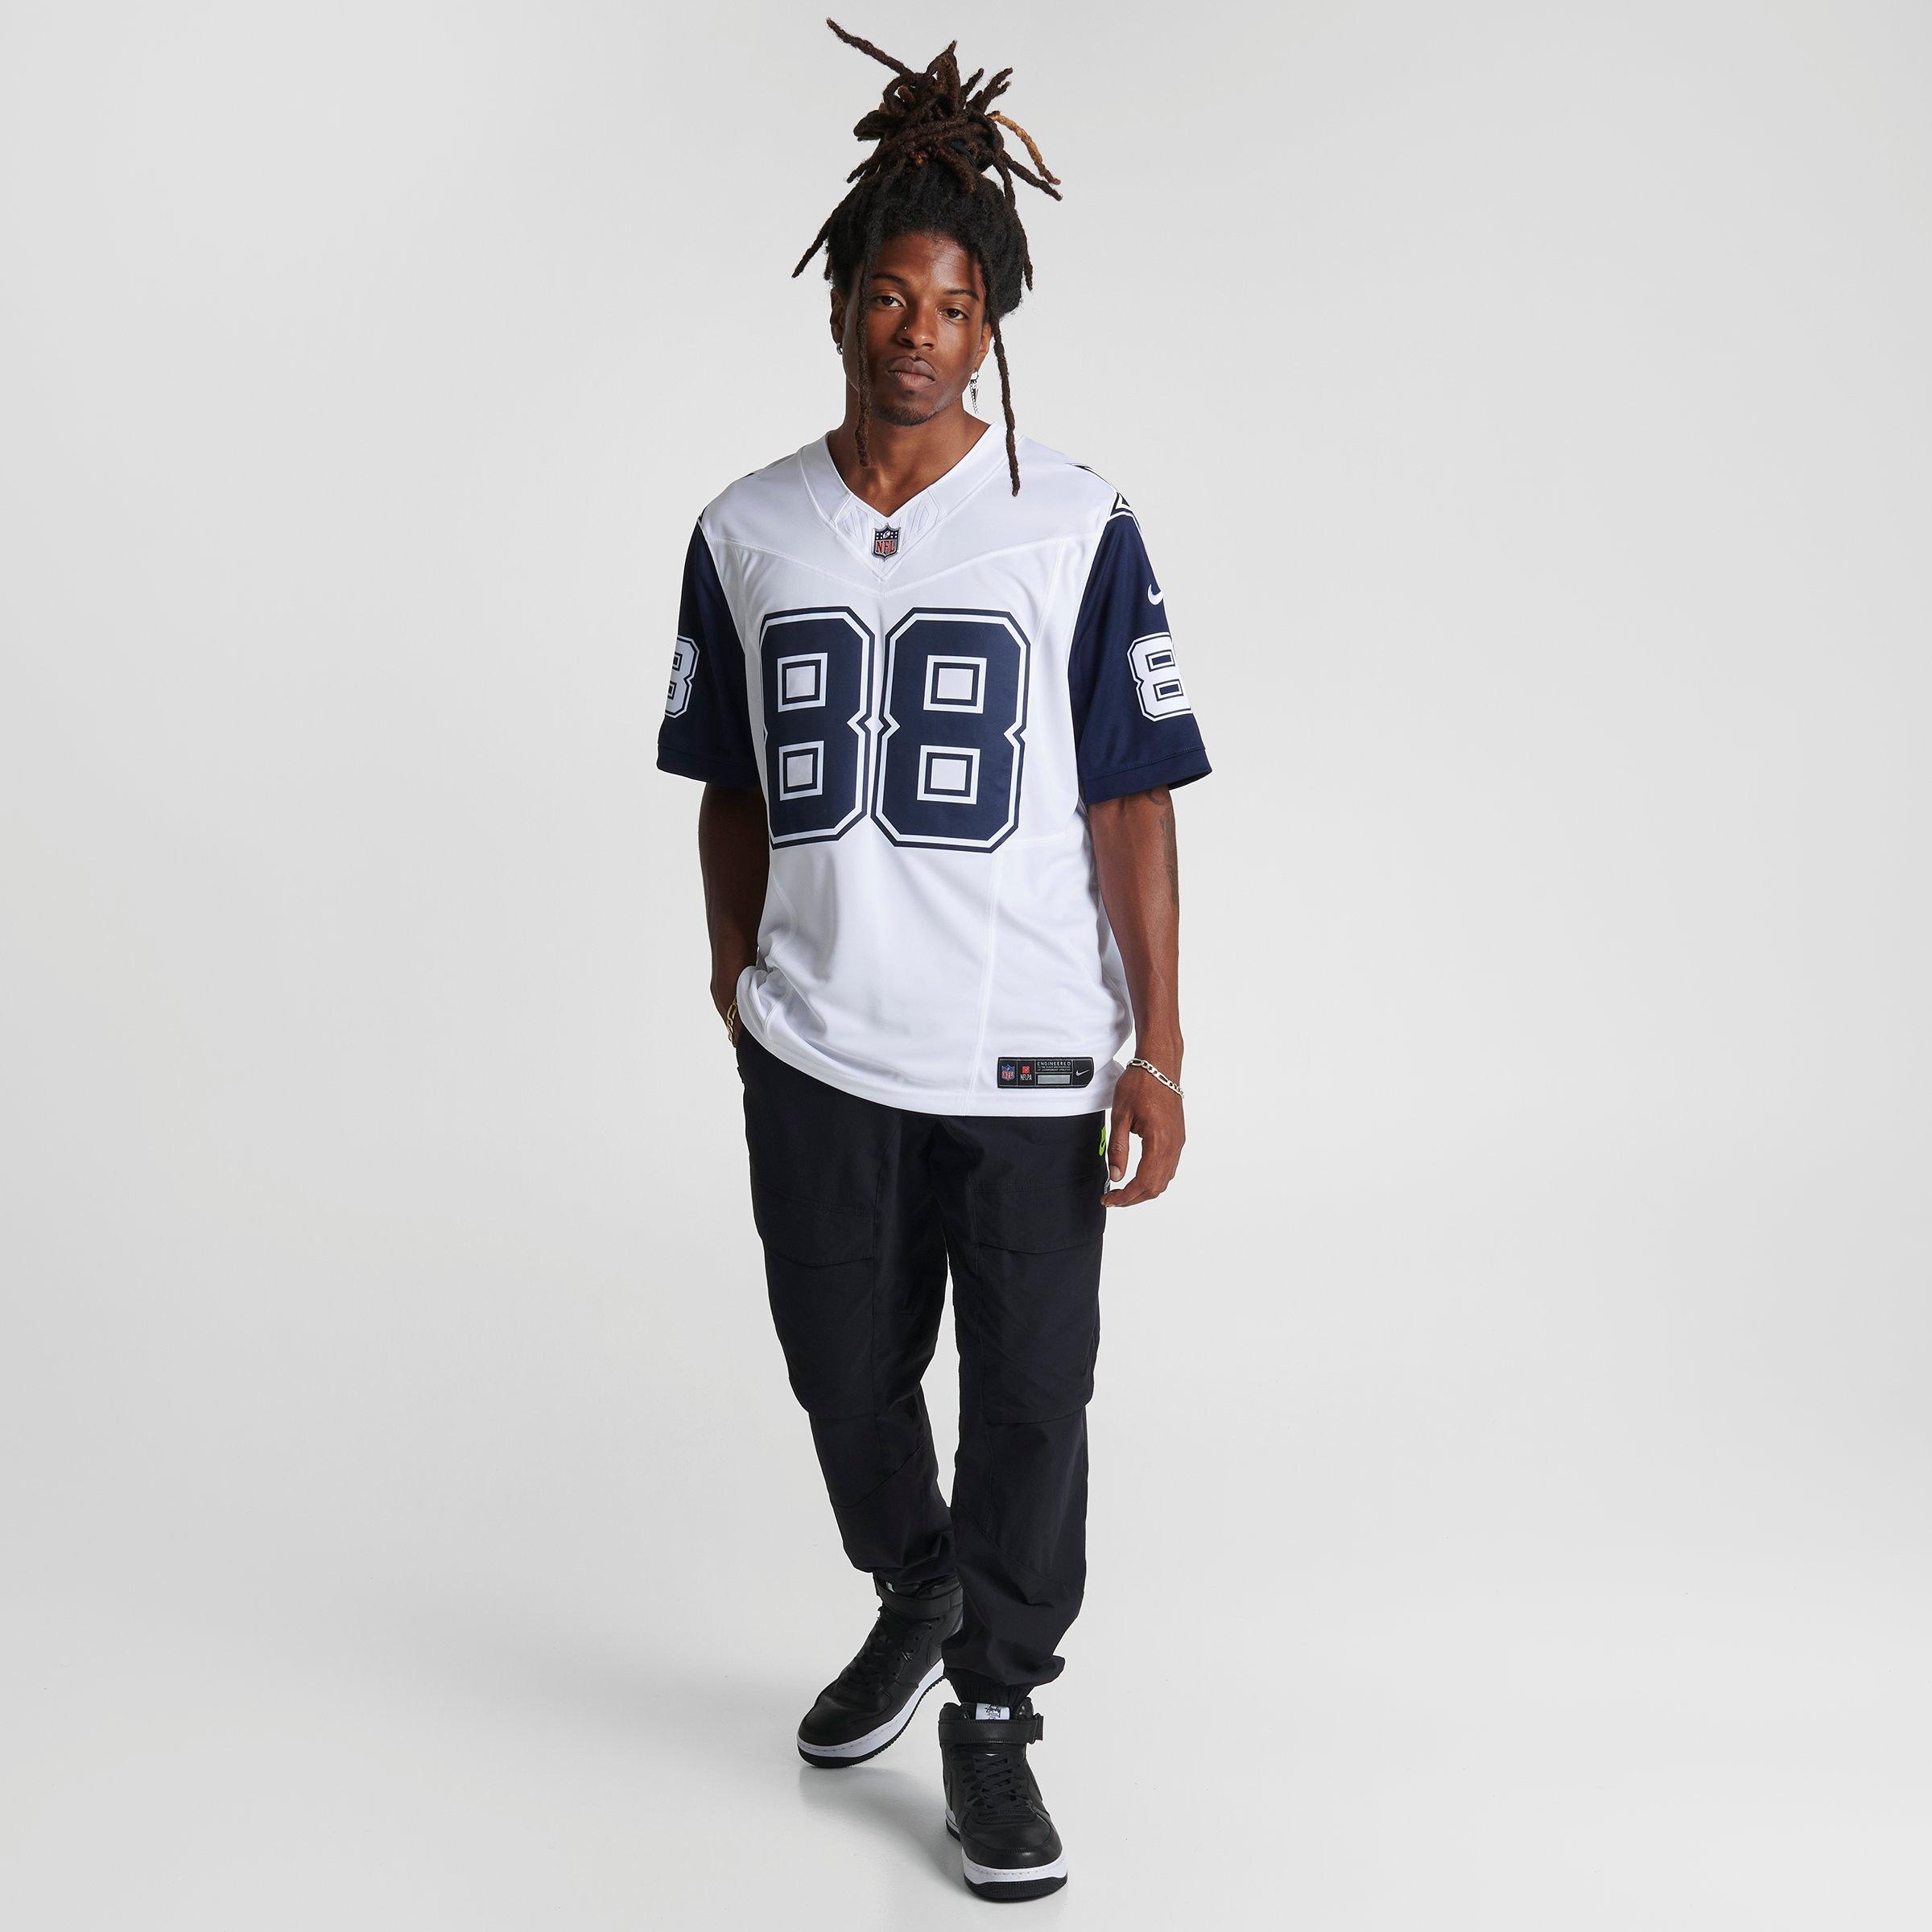 Cowboys are officially going to wear their navy jerseys three